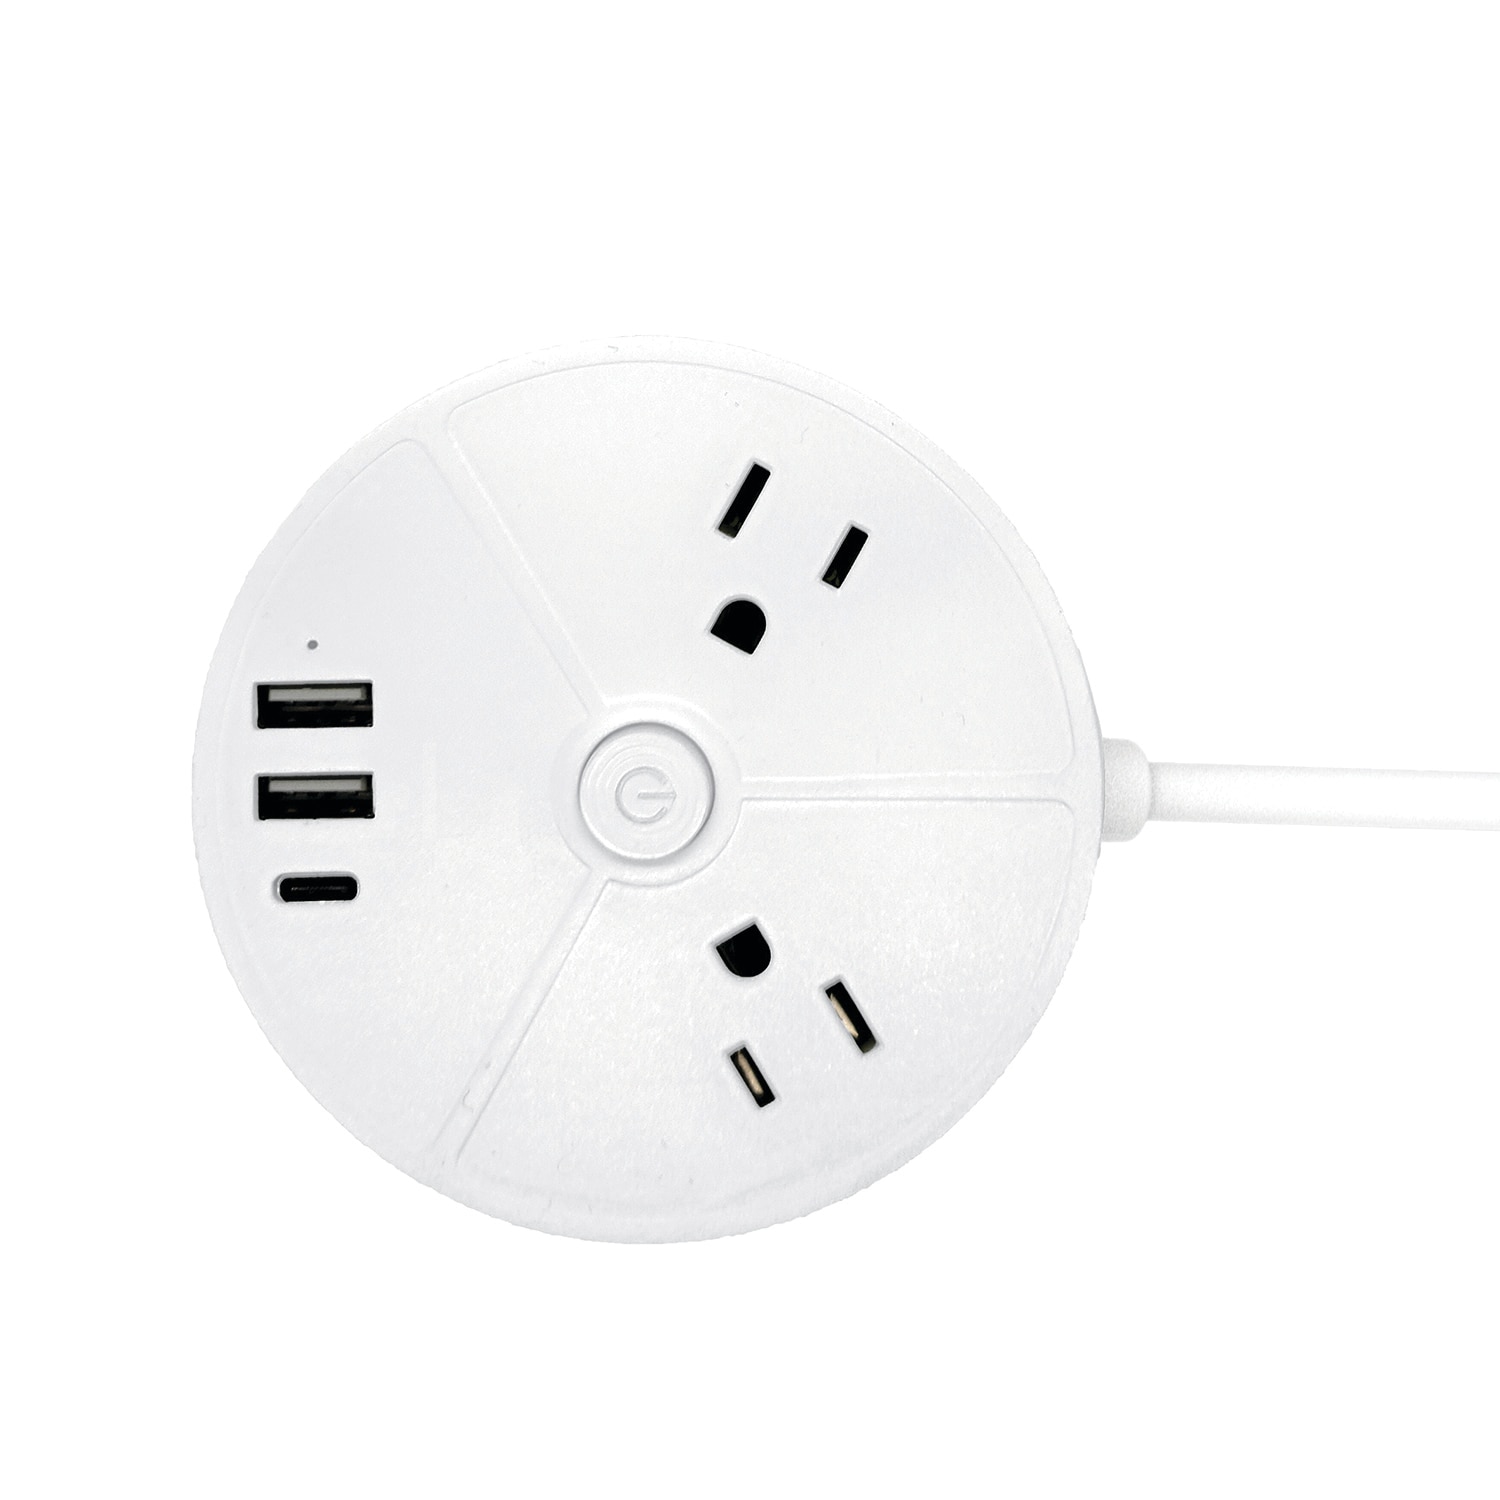 5FT Extendable Premium High Density Cord with 2 AC Outlets + 2 USB-A Ports + 1 Type-C Port, & Built in Desktop Grip to hold securely- Bult in Surge Protection- ETL Certified- White